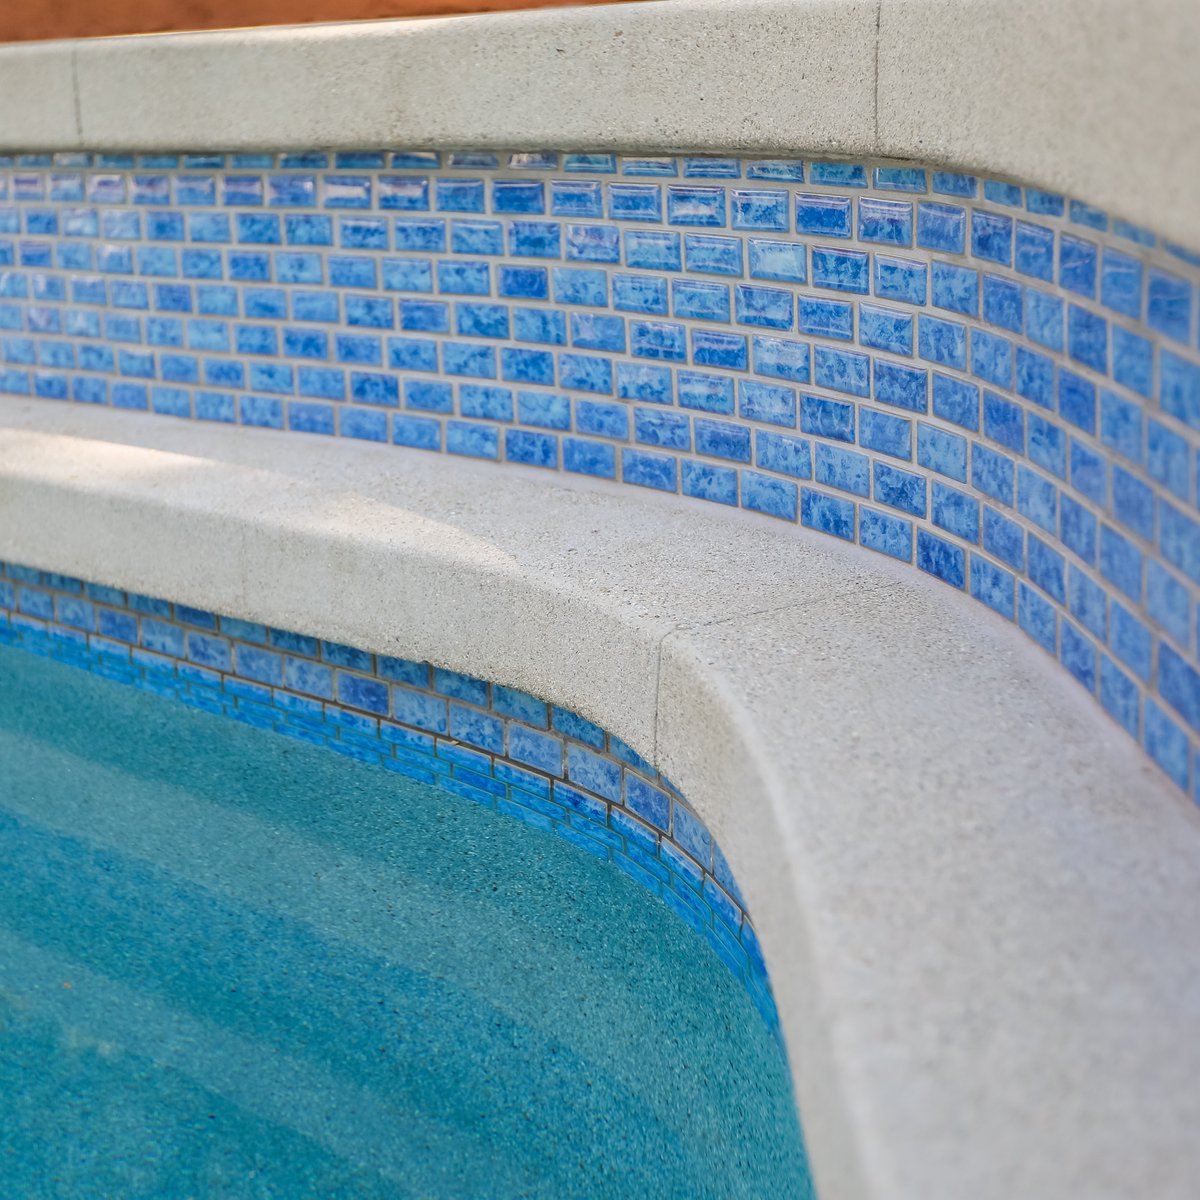 Transform the look of your pool with new tiles or decorative accents! Simple changes can make a big impact and give your pool area an updated and refreshed aesthetic. 🌊💦 #poolrenovation #pooltiles #pooldecor